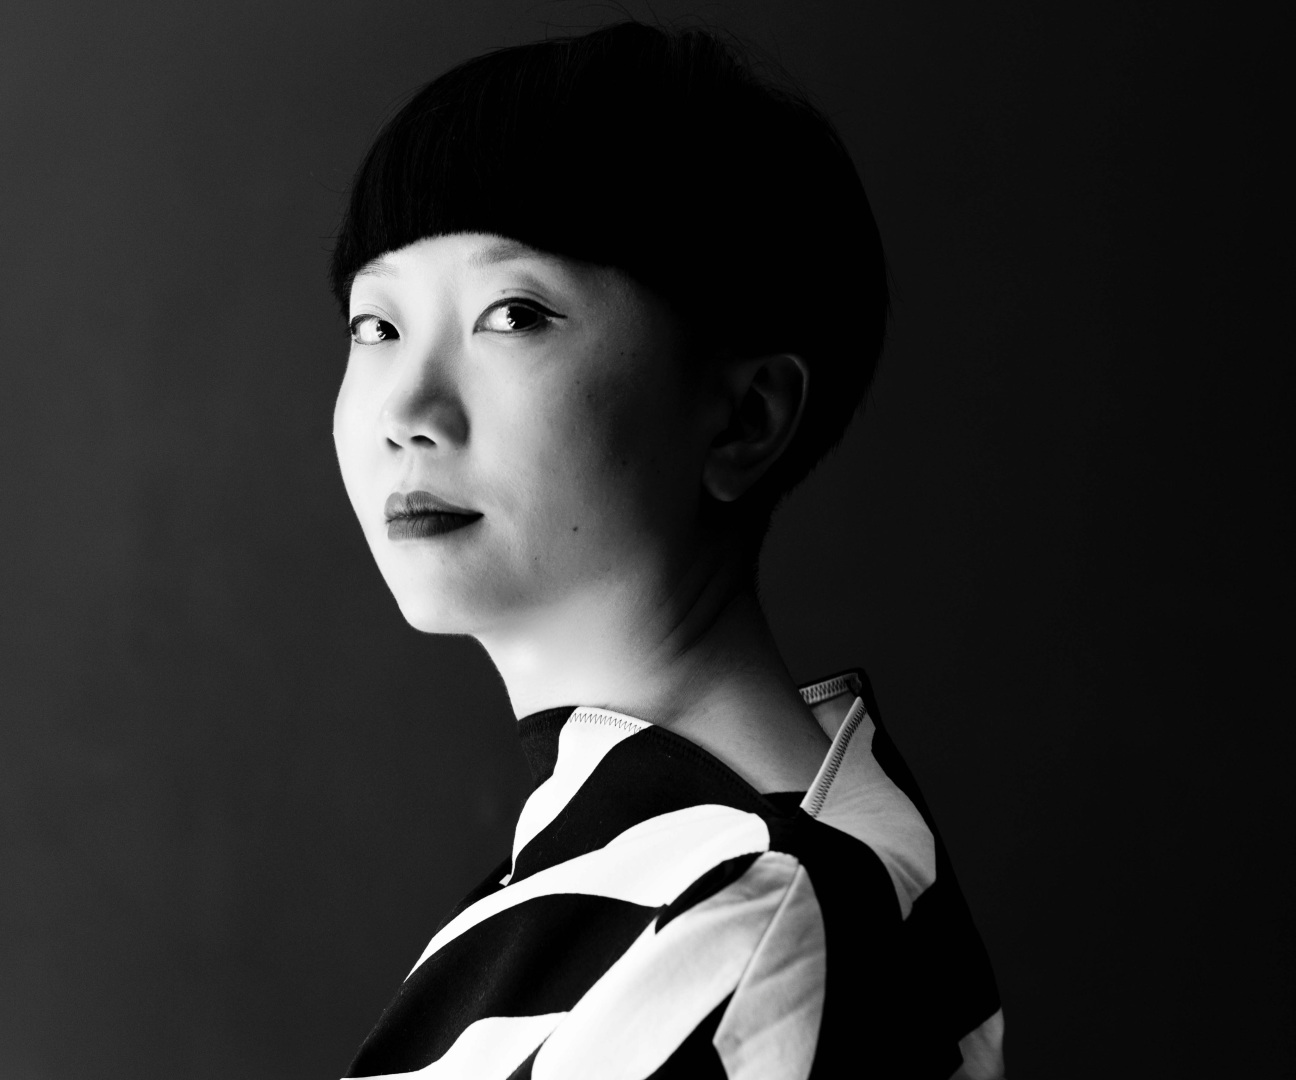 JiaJia Fei — Entrepreneurial Digital Strategist for the art world, formerly of the Guggenheim and The Jewish Museum